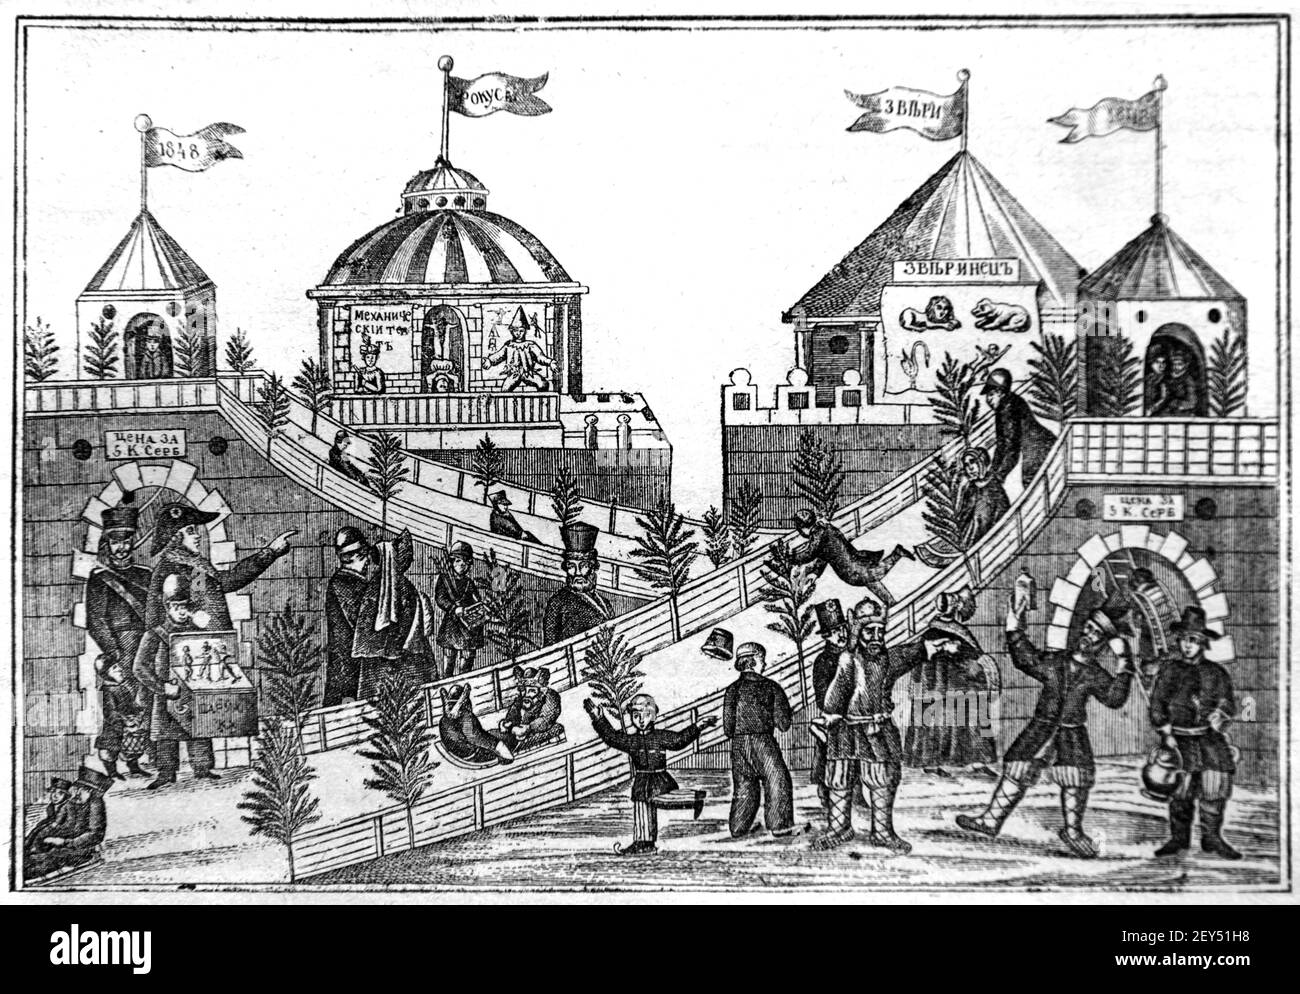 Moscow Winter Fair, Fairground, Amusement Park & Moscovites Tobogganing Down Slide Moscow Russia 1848 Vintage Illustration or Engraving Stock Photo